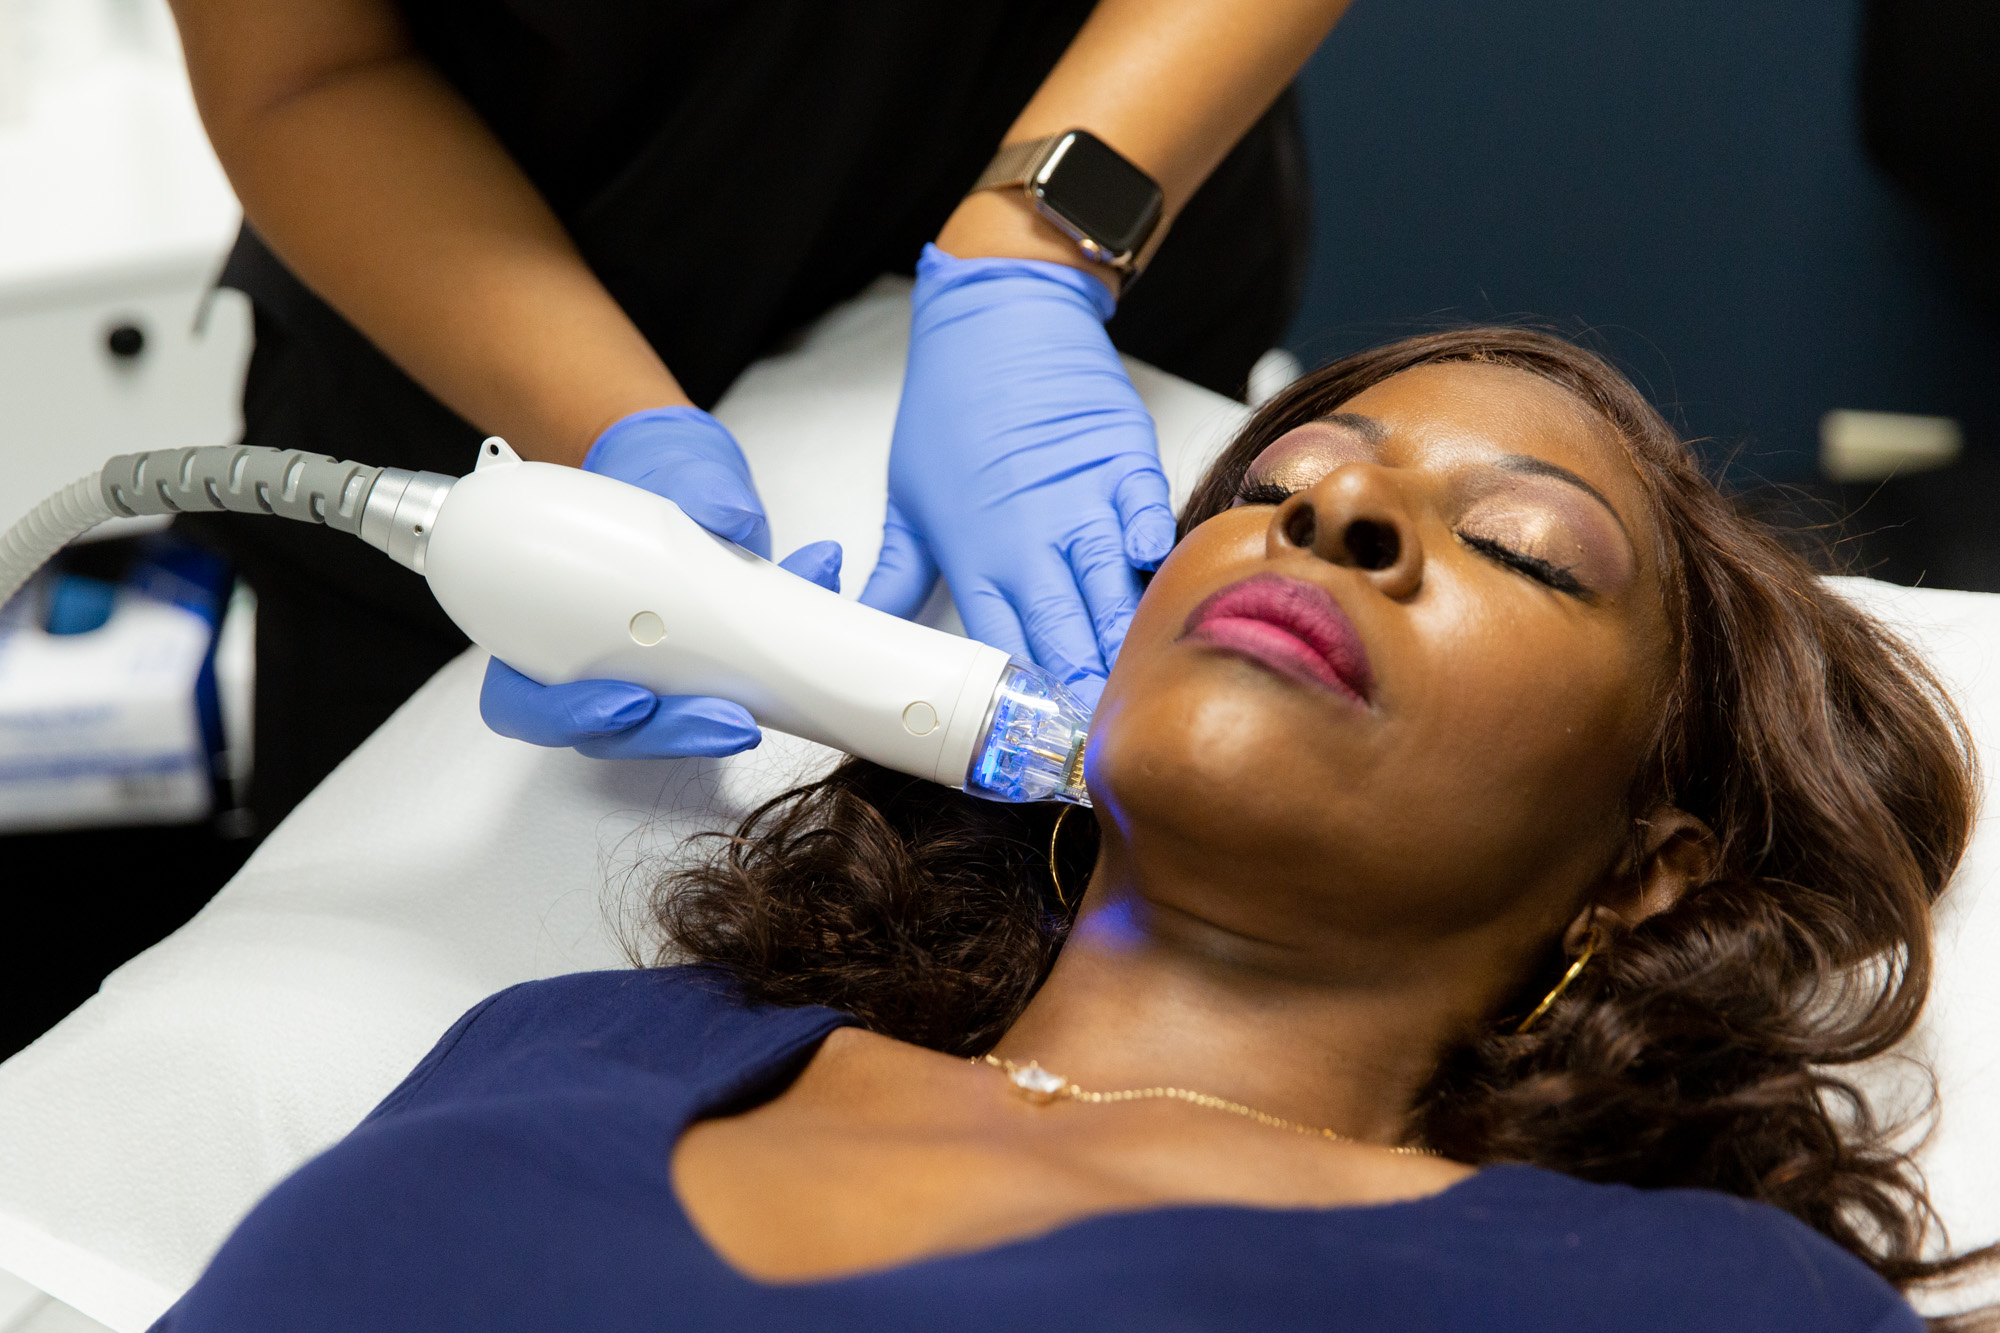 Marcos Medical provider uses handheld microneedling tool on female patient's jawline. Patient is laying down on her back.